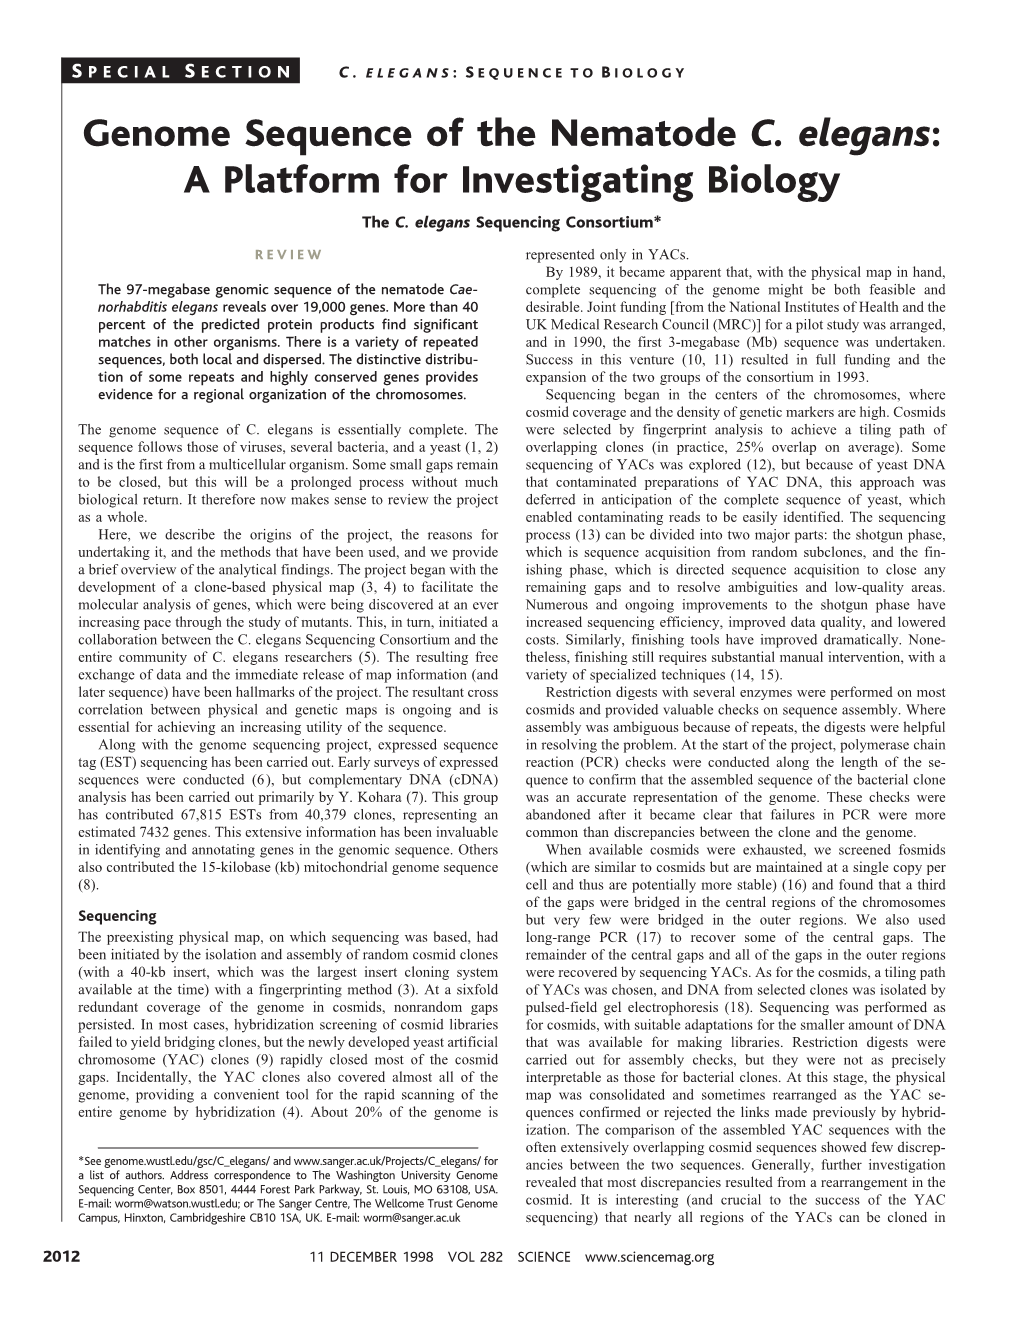 Genome Sequence of the Nematode C. Elegans: a Platform for Investigating Biology the C